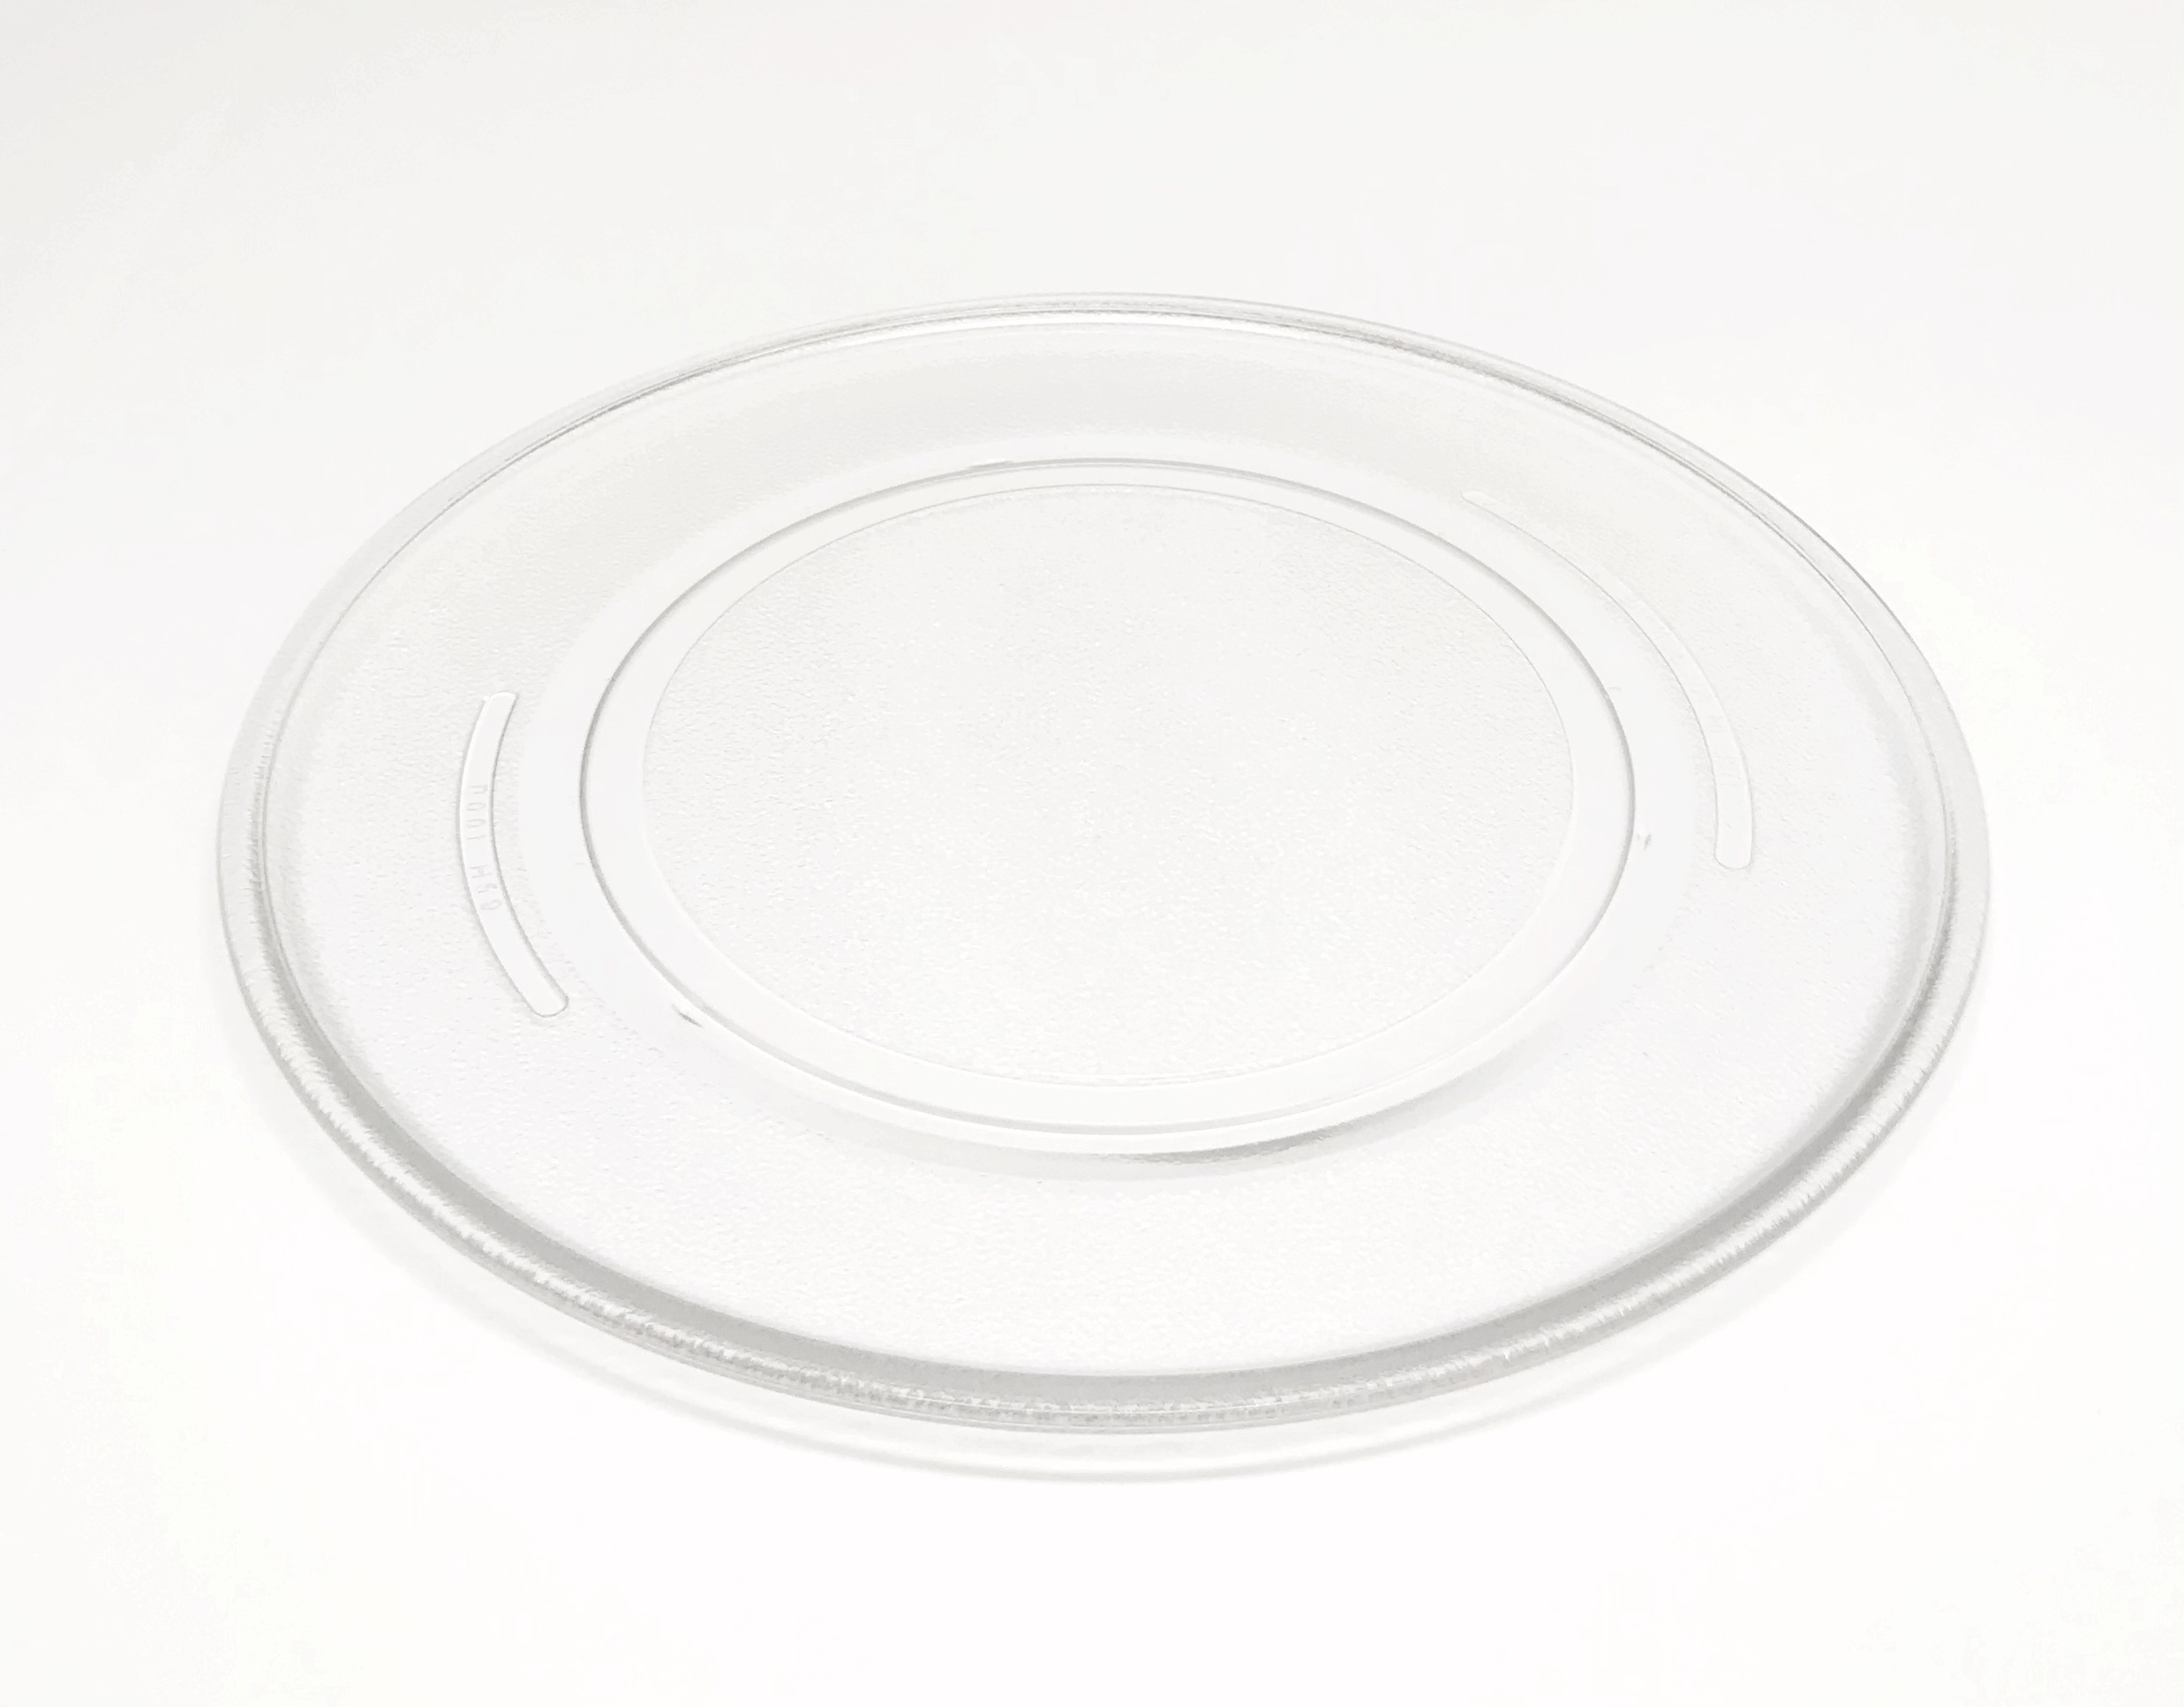 Sharp OEM Sharp Microwave Turntable Glass Tray Plate Shipped With R5A53, R-5A53